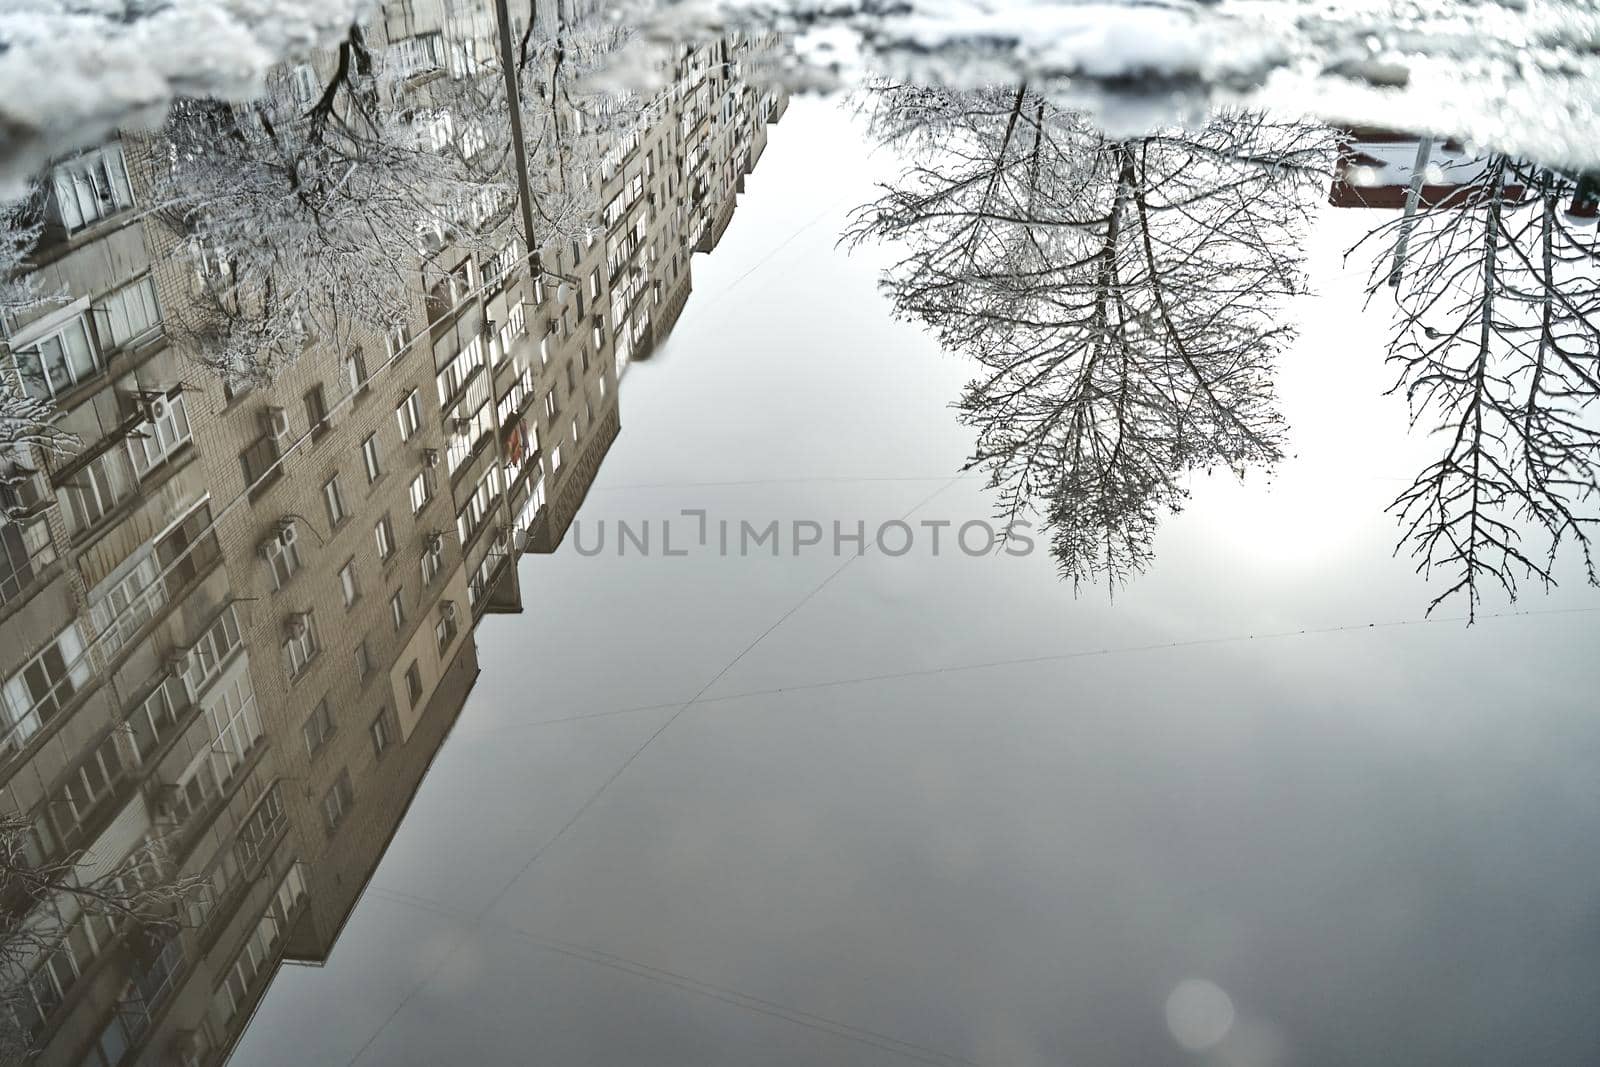 Reflection on the puddle of winter snow covered city scenery.